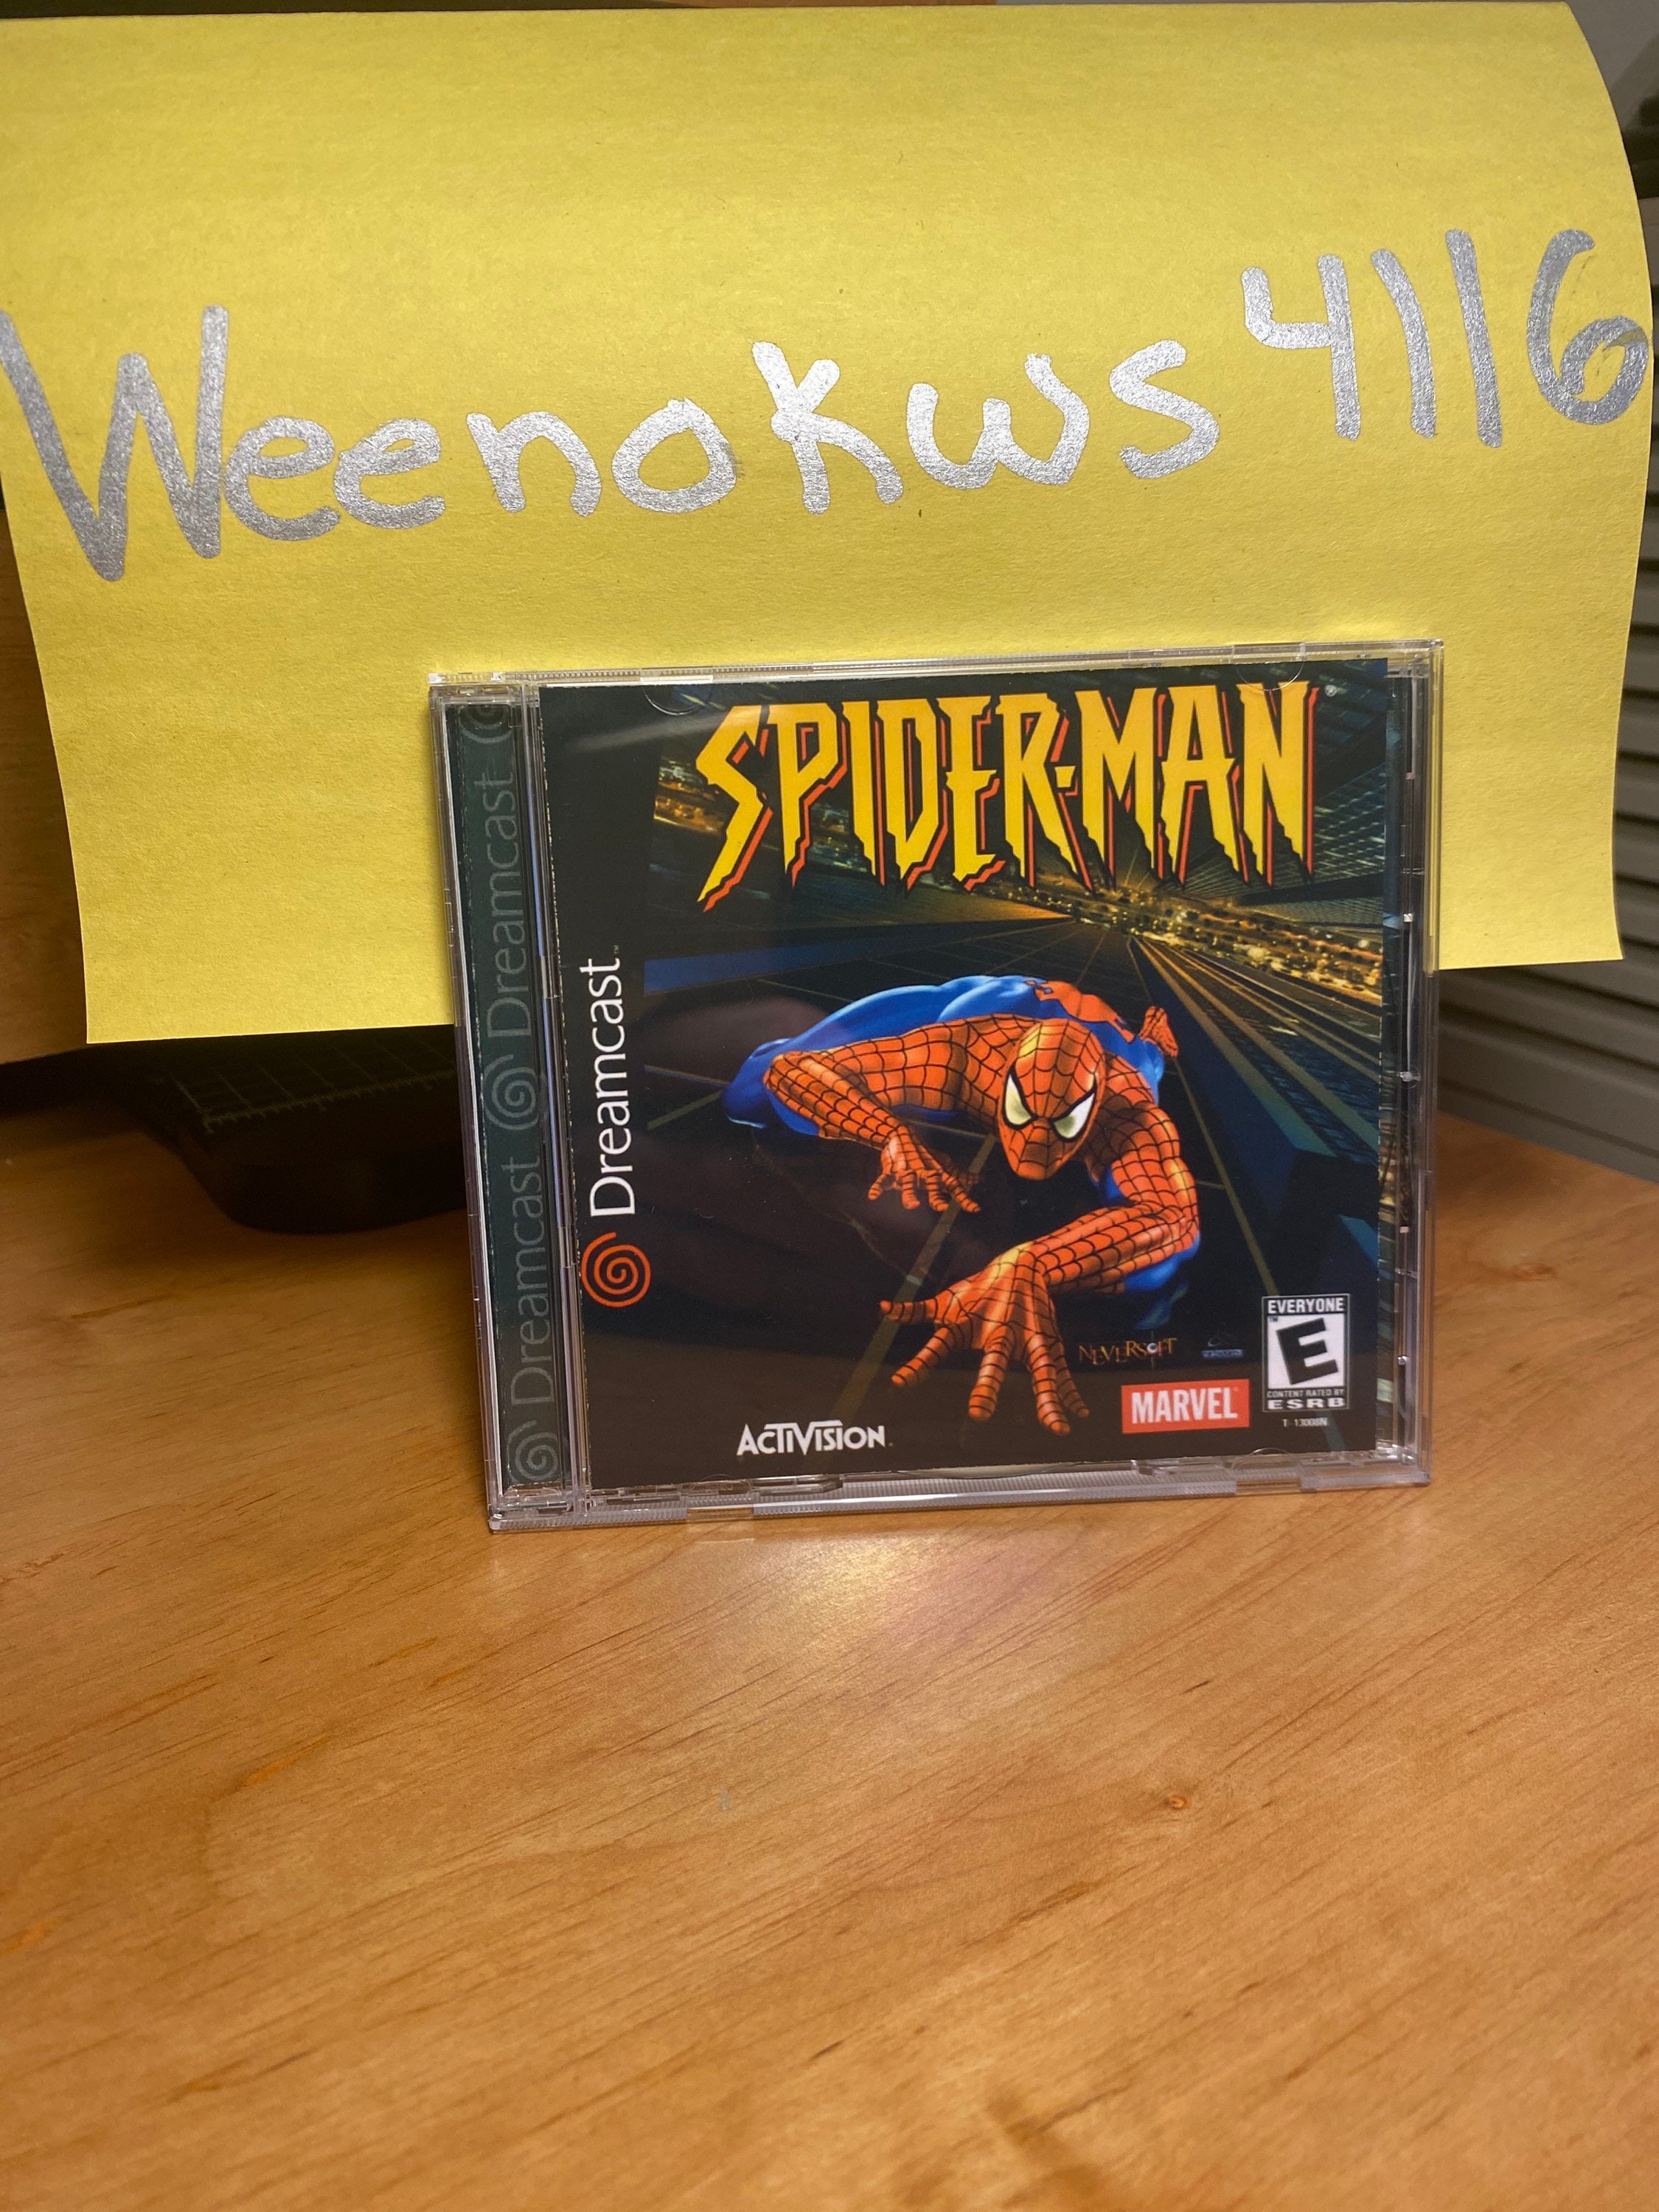 Spiderman Dreamcast REPRODUCTION Case No Game - Etsy Denmark